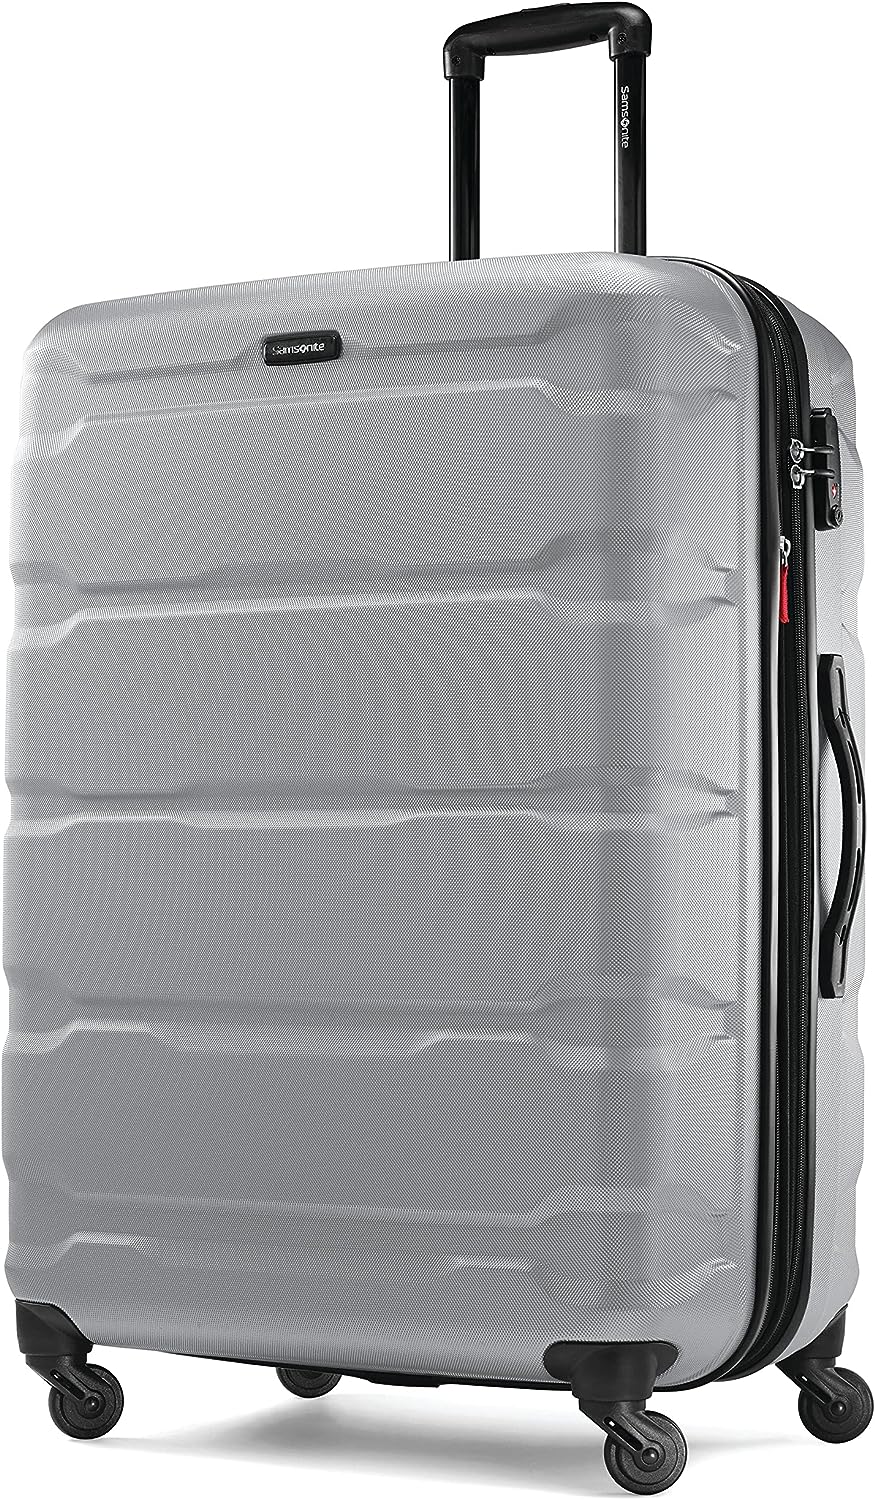 Samsonite Omni PC Hardside Expandable Luggage with Spinner Wheels, Checked-Large 28-Inch, Silver